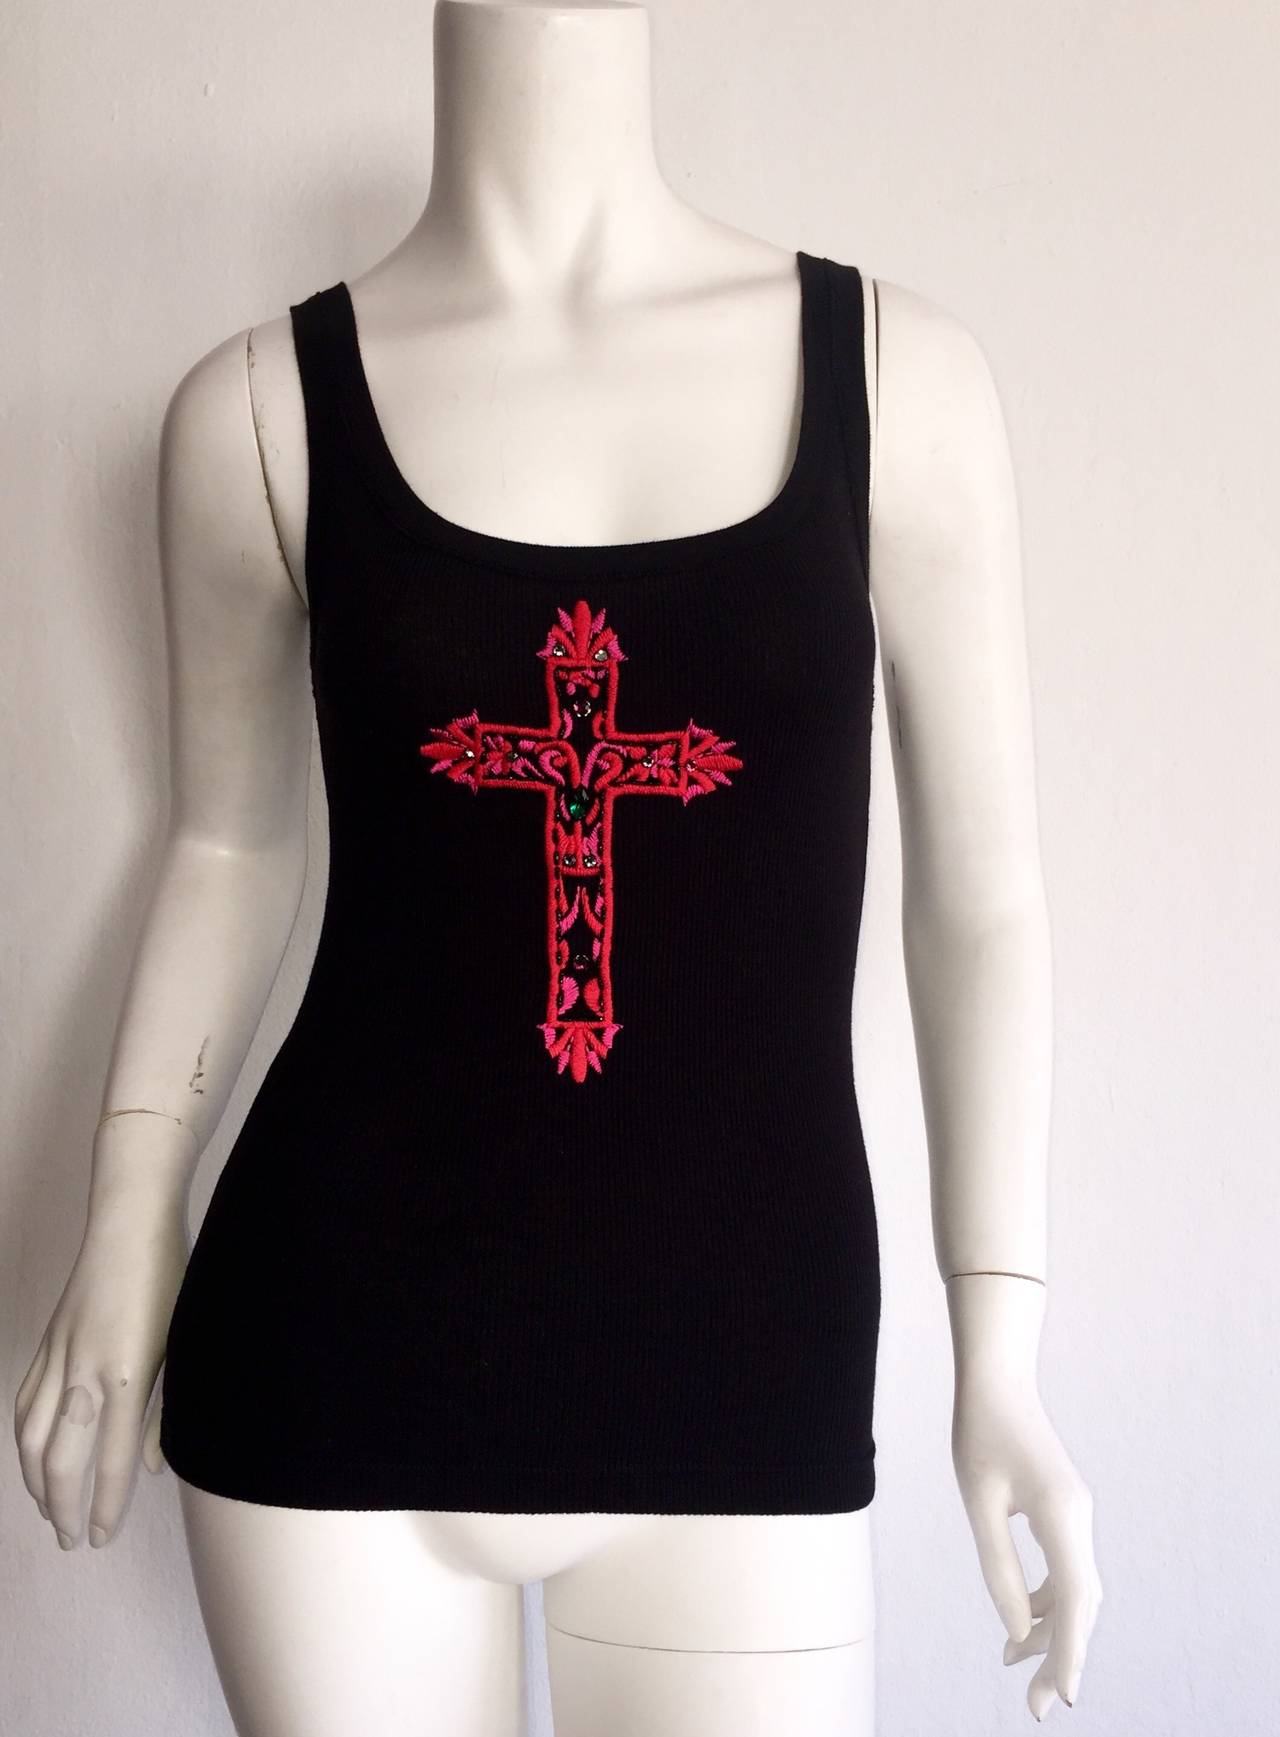 Beautiful classic black tank by Blumarine Jeans. Pink cross on front, embellished with jewels. Solid back. Perfect with jeans or shorts, and great tucked into a skirt! In great condition. Made in Italy. Approximately Size Small-Medium (Lots of